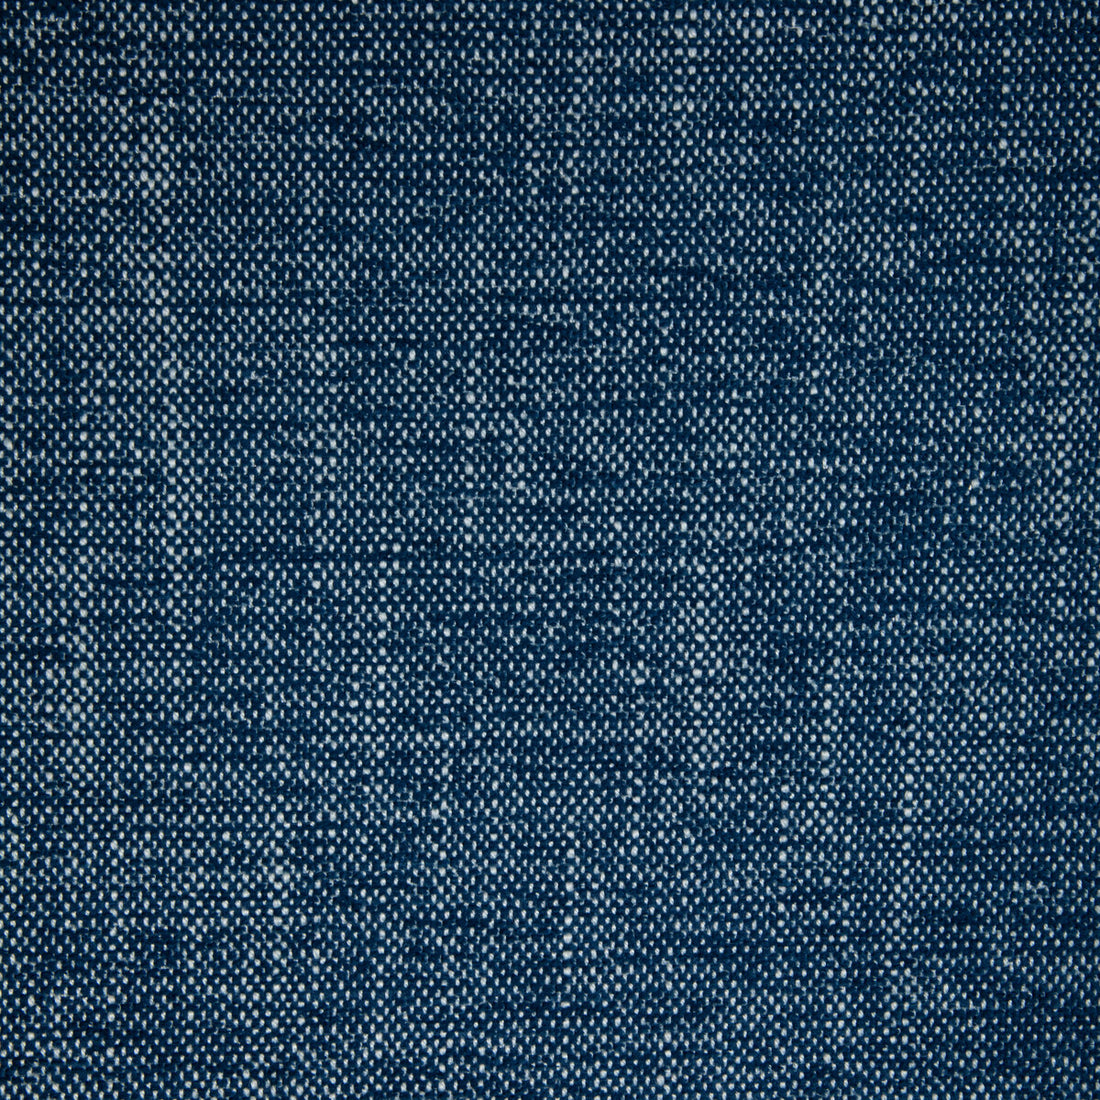 Kravet Smart-36885 fabric in 51 color - pattern 36885.51.0 - by Kravet Smart in the Inside Out Performance Fabrics collection